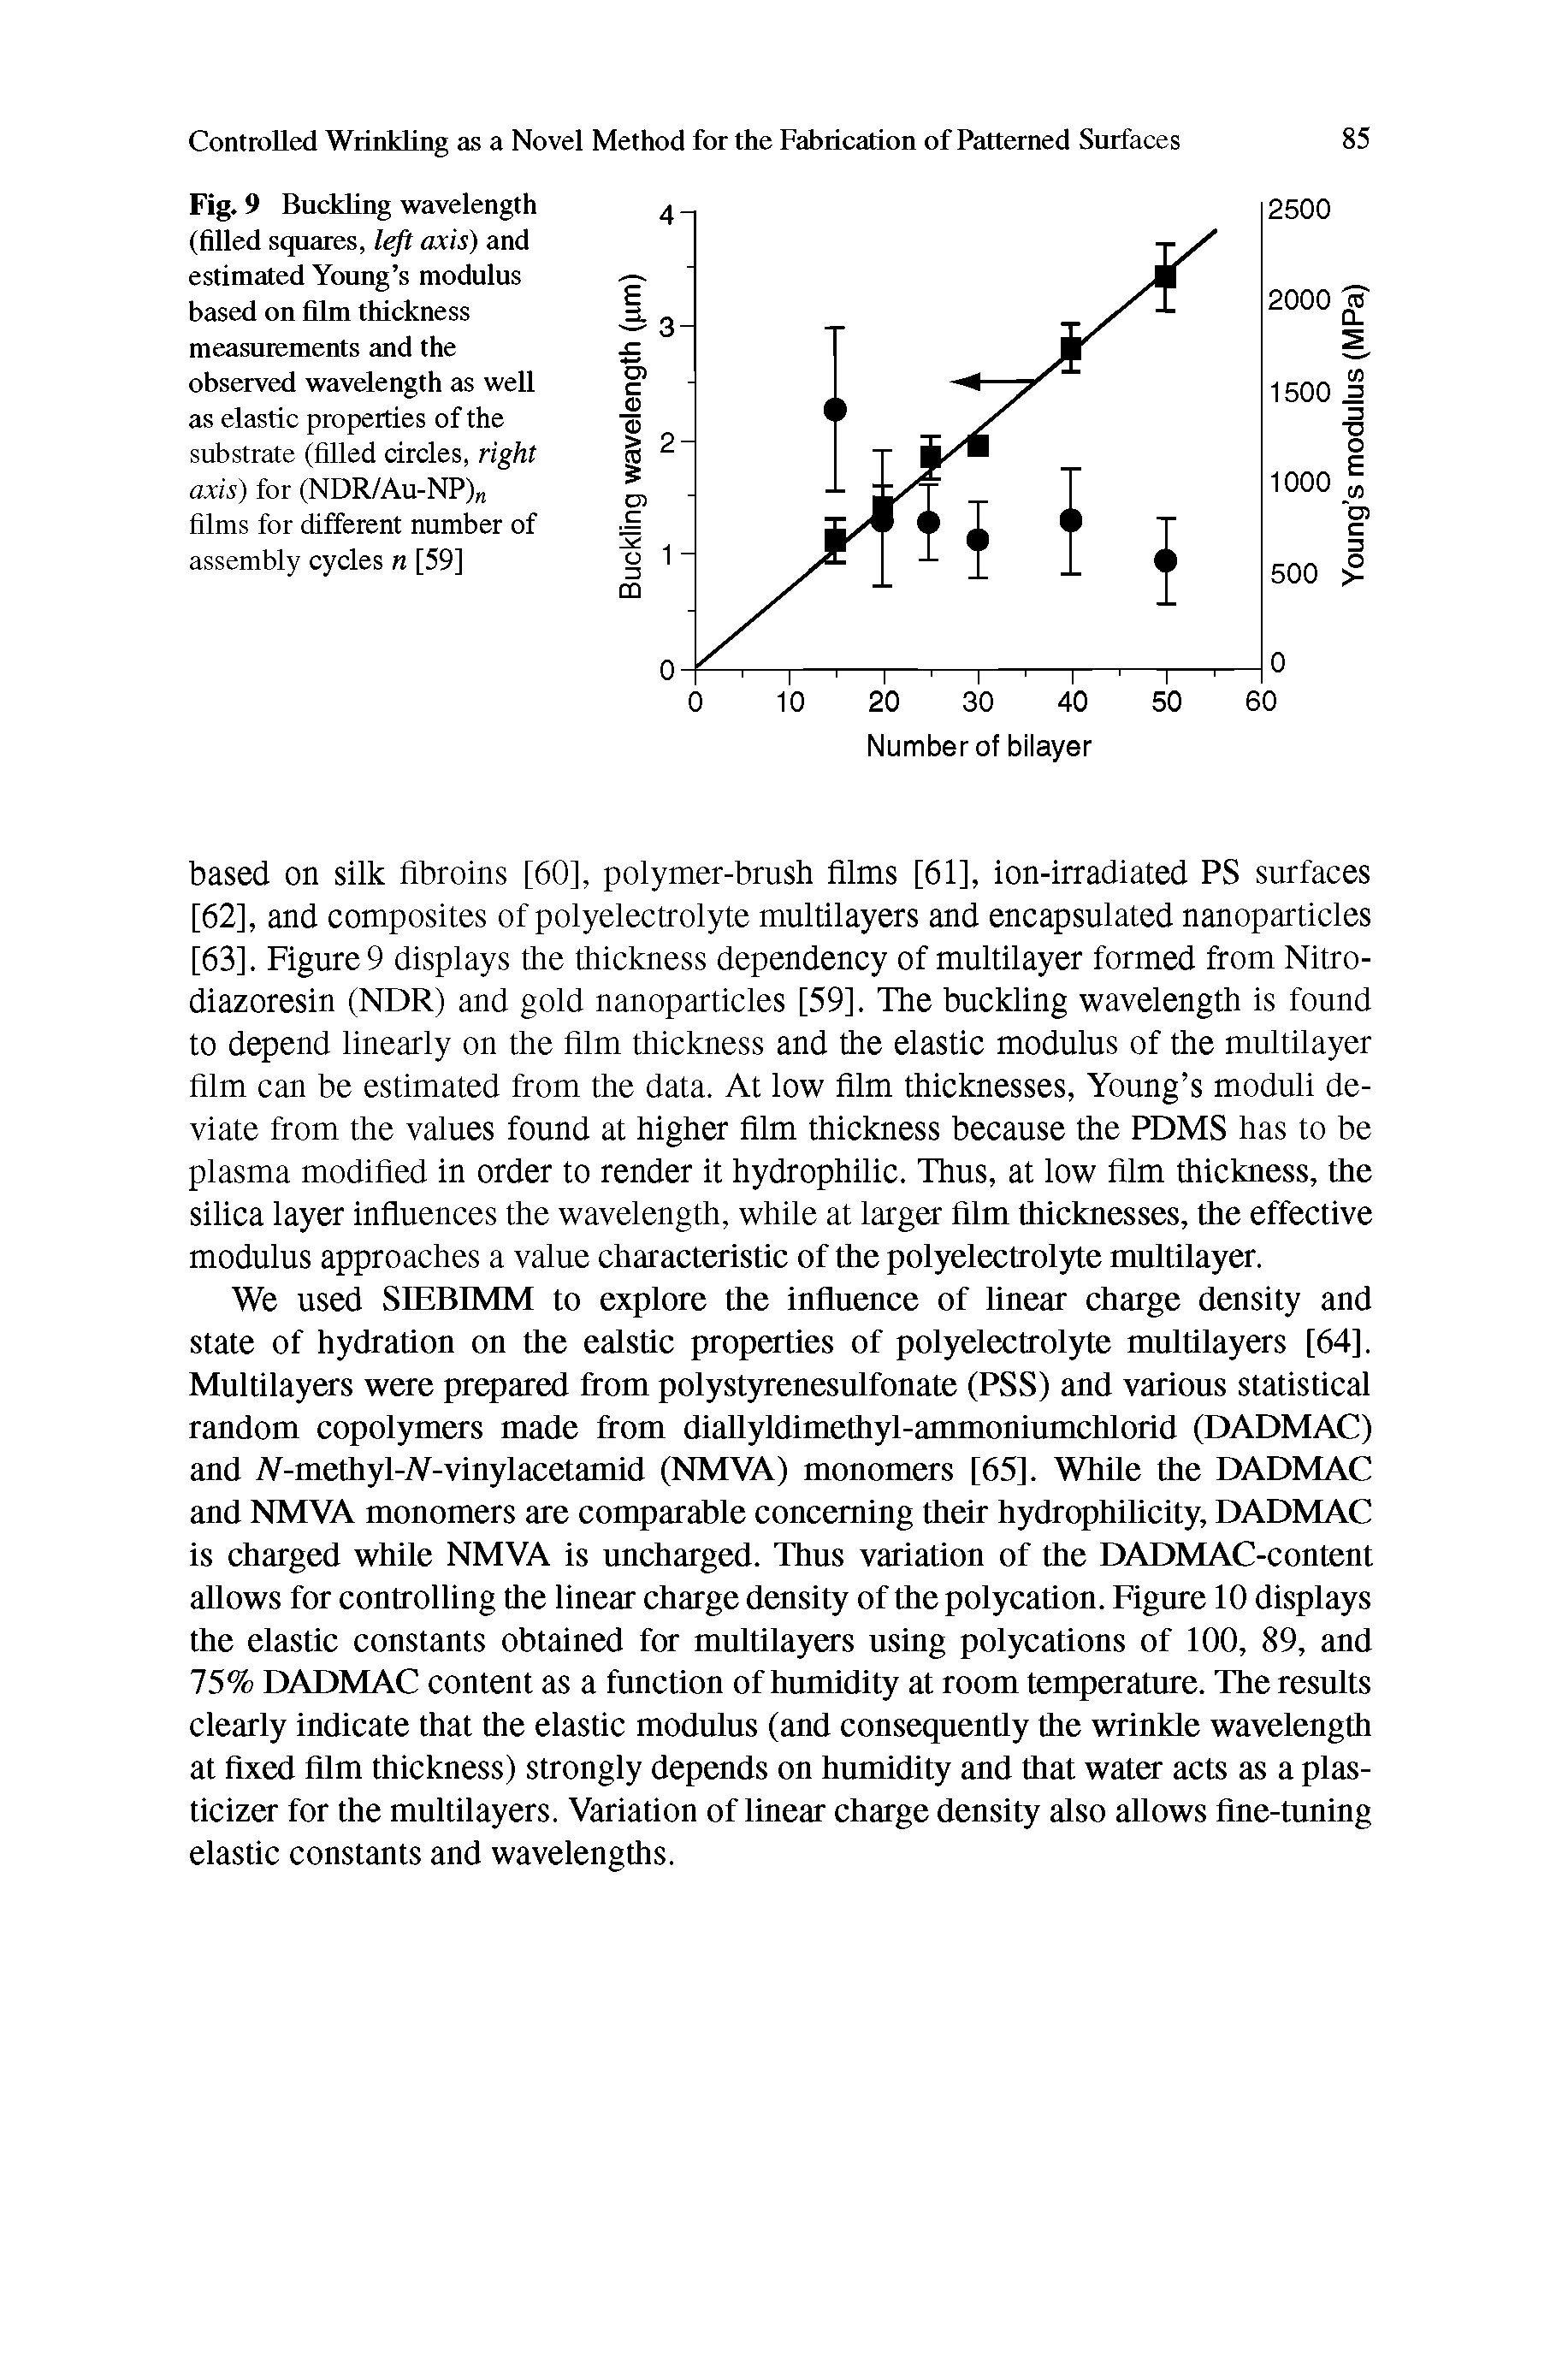 Fig. 9 Buckling wavelength (filled squares, left axis) and estimated Young s modulus based on film thickness measurements and the observed wavelength as well as elastic properties of the substrate (filled circles, right axis) for (NDR/Au-NP)n films for different number of assembly cycles n [59]...